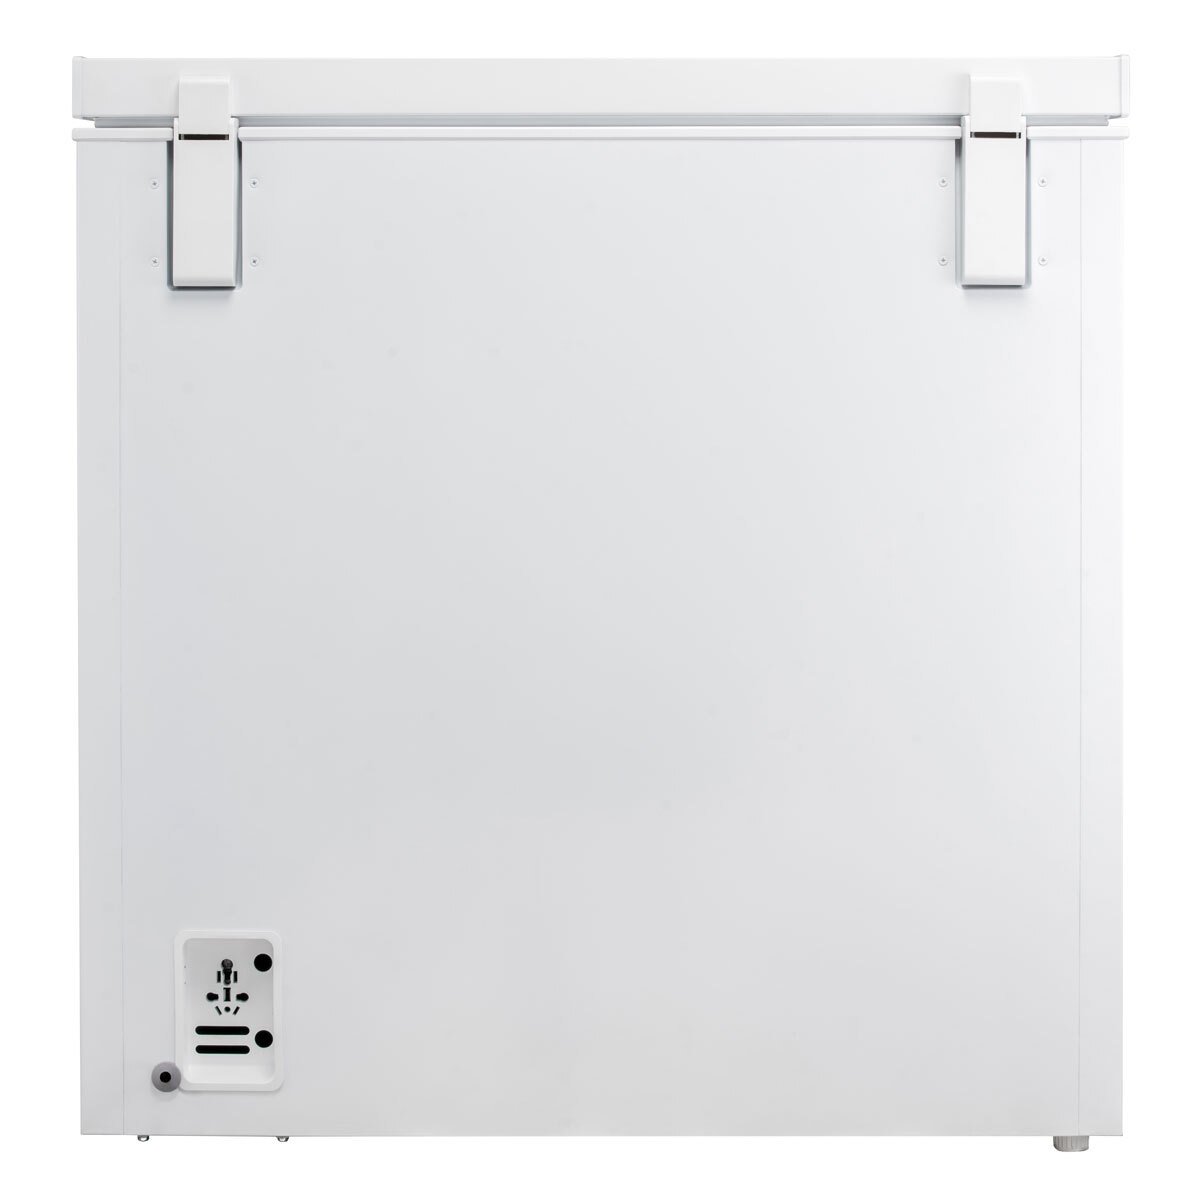 Hisense FC252D4BW1, 198L, Chest Freezer, A+ Rated in White - Signature Retail Stores